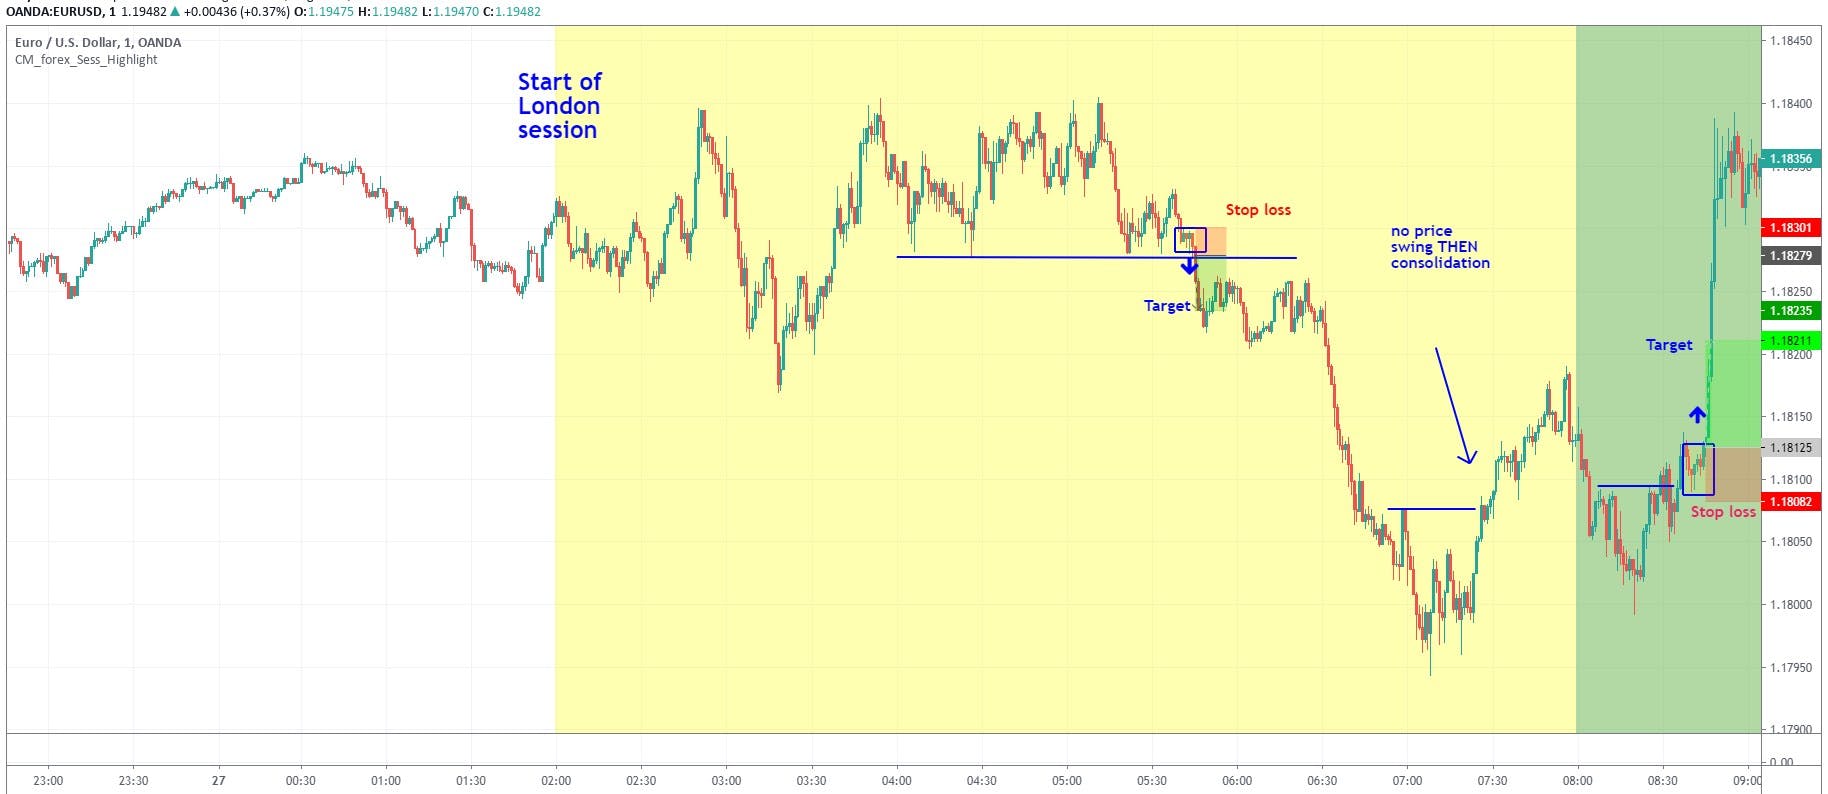 EURUSD technical turnaround day trading strategy on 1-minute chart